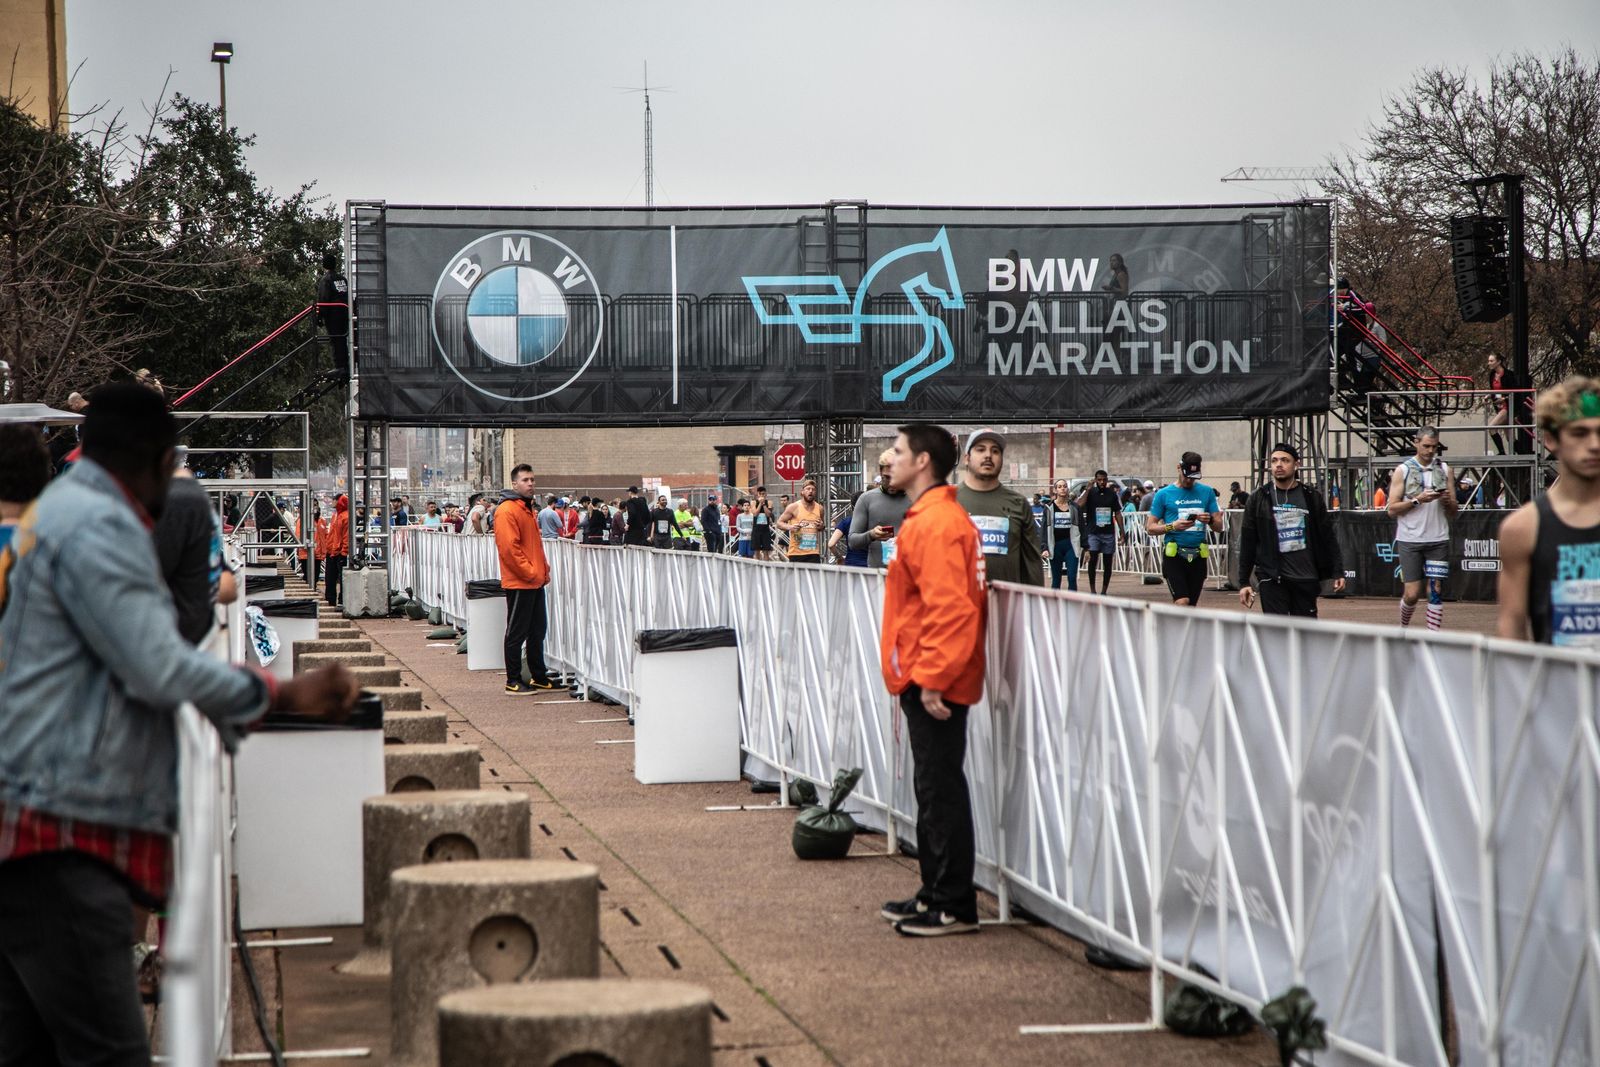 Onstage Systems providing full service sports event production services including audio, visual, and staging solutions for the BMW Dallas Marathon